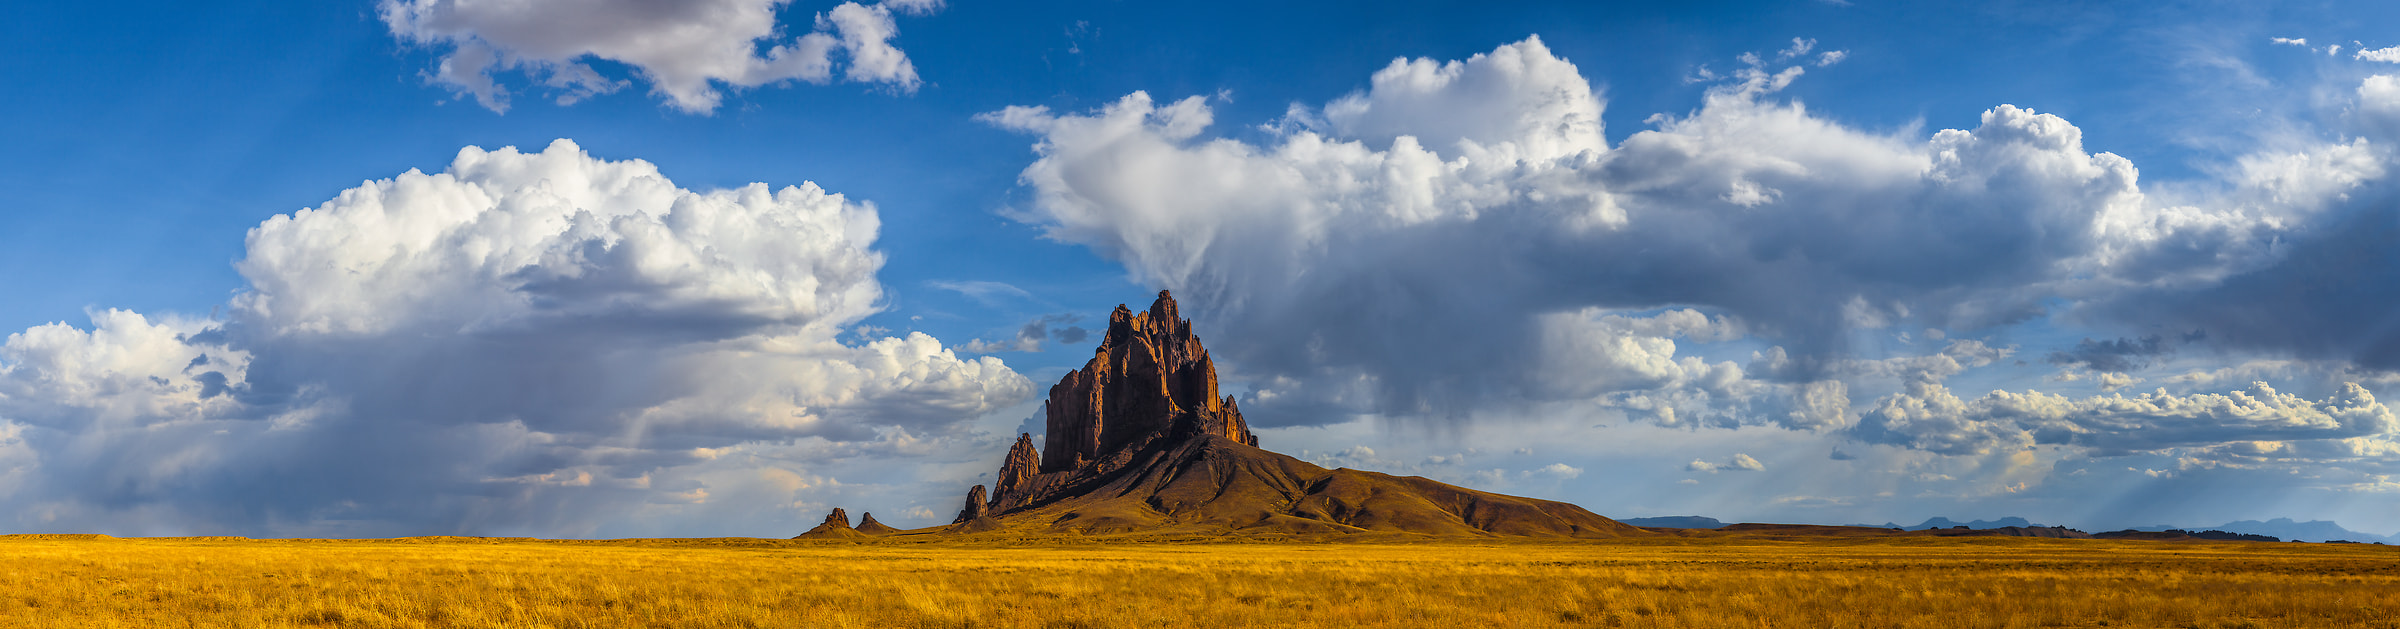 102 megapixels! A very high resolution, large-format VAST photo print of a rock formation in the American West; landscape photograph created by Phillip Noll in Shiprock, New Mexico